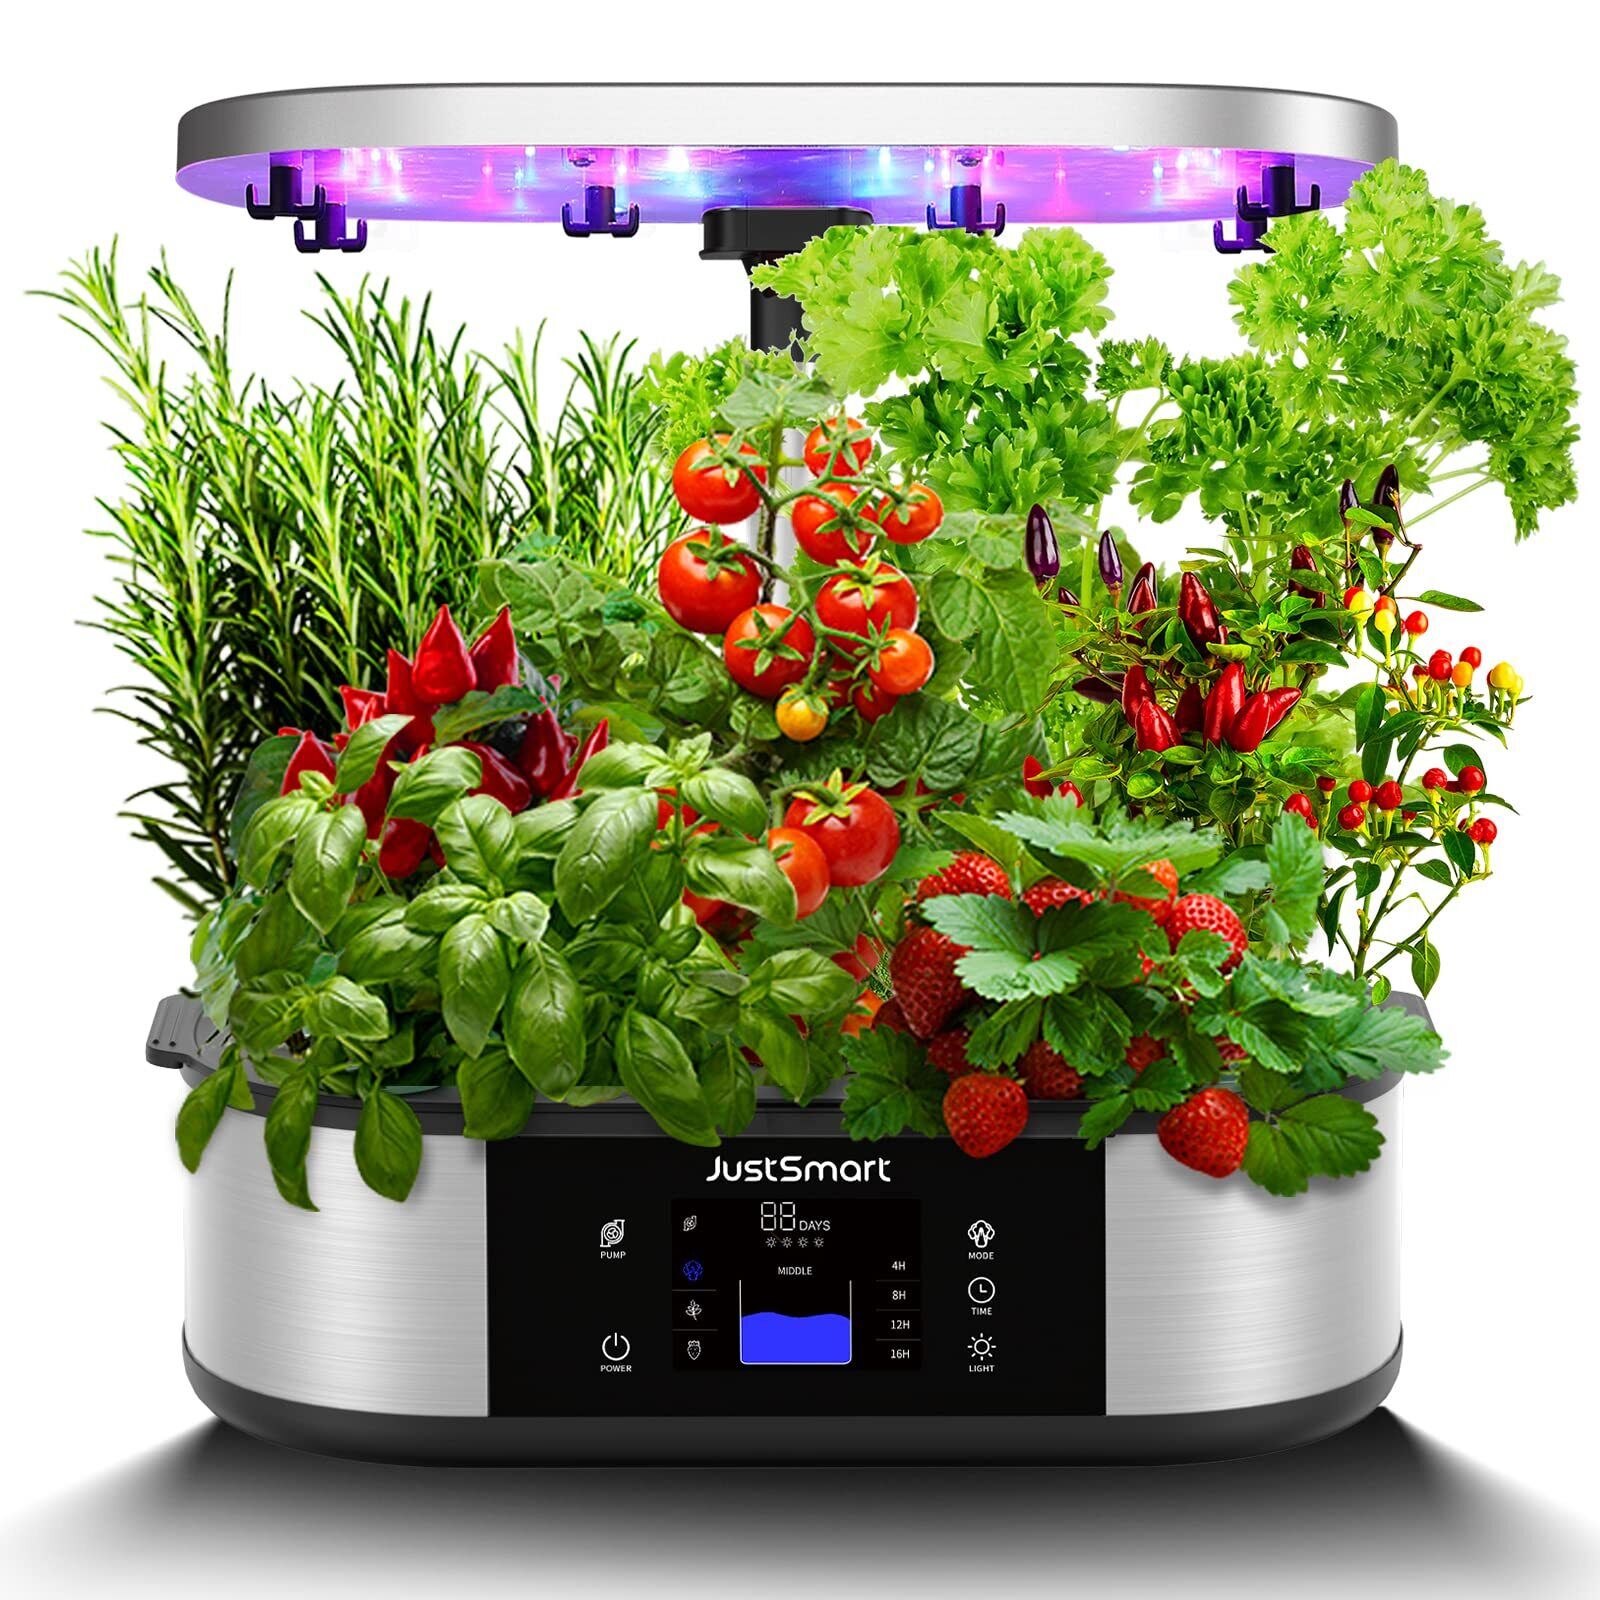 12 Pods Hydroponics Growing System, Indoor Garden with 30W LED Grow Light, Timer